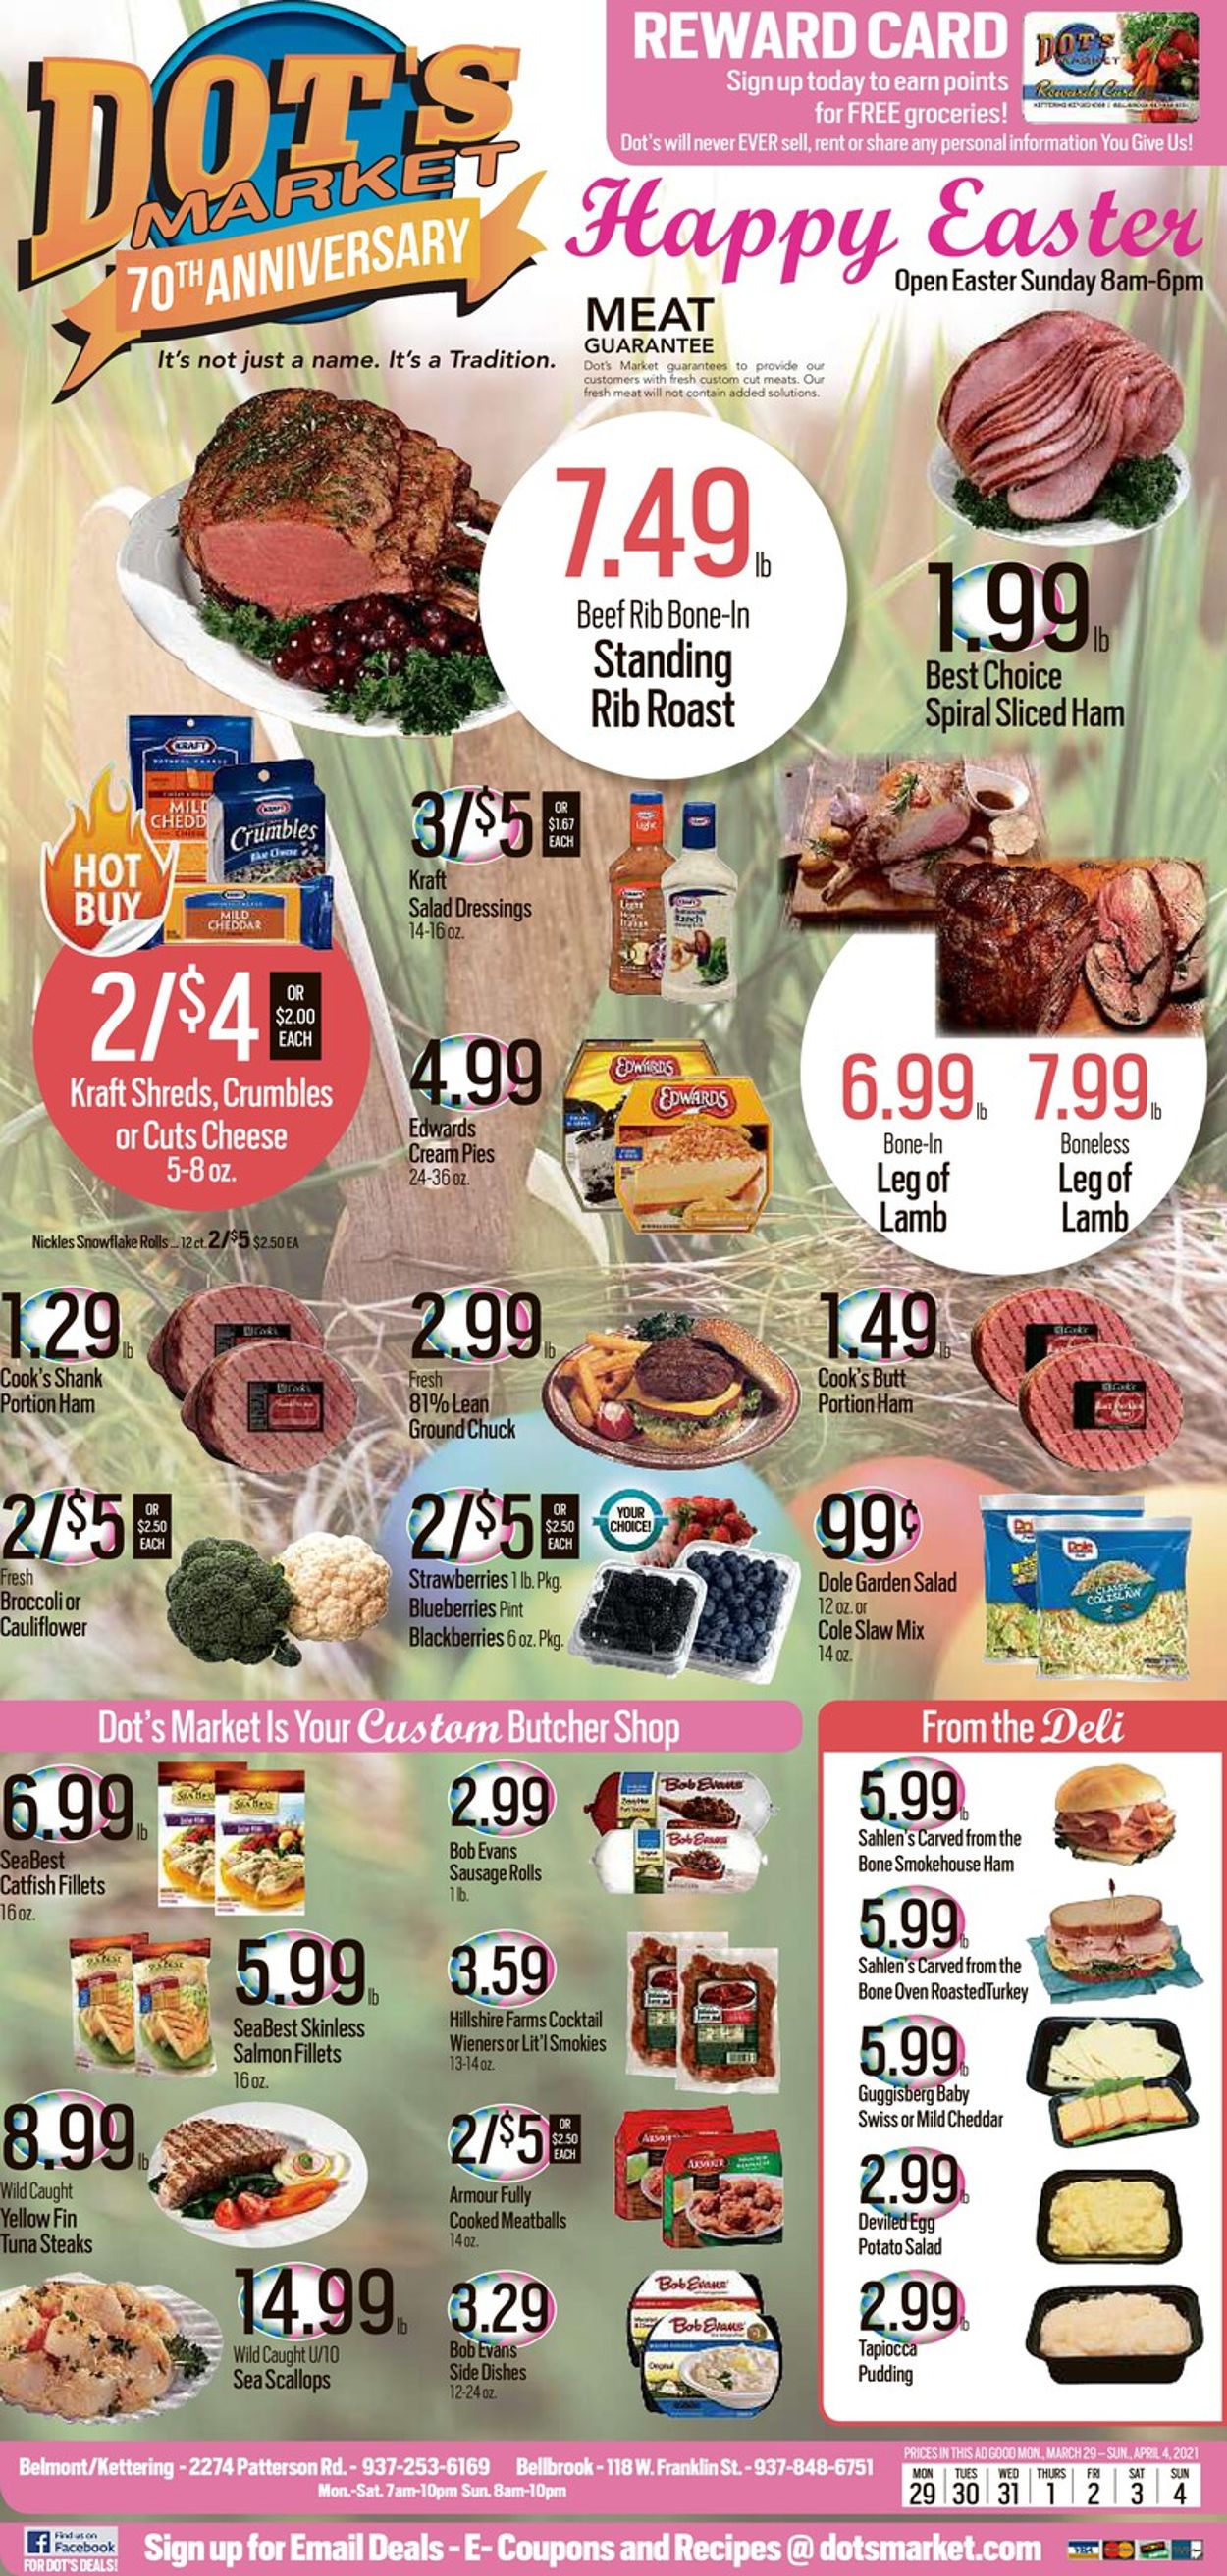 Catalogue Dot's Market - Easter 2021 ad from 03/29/2021